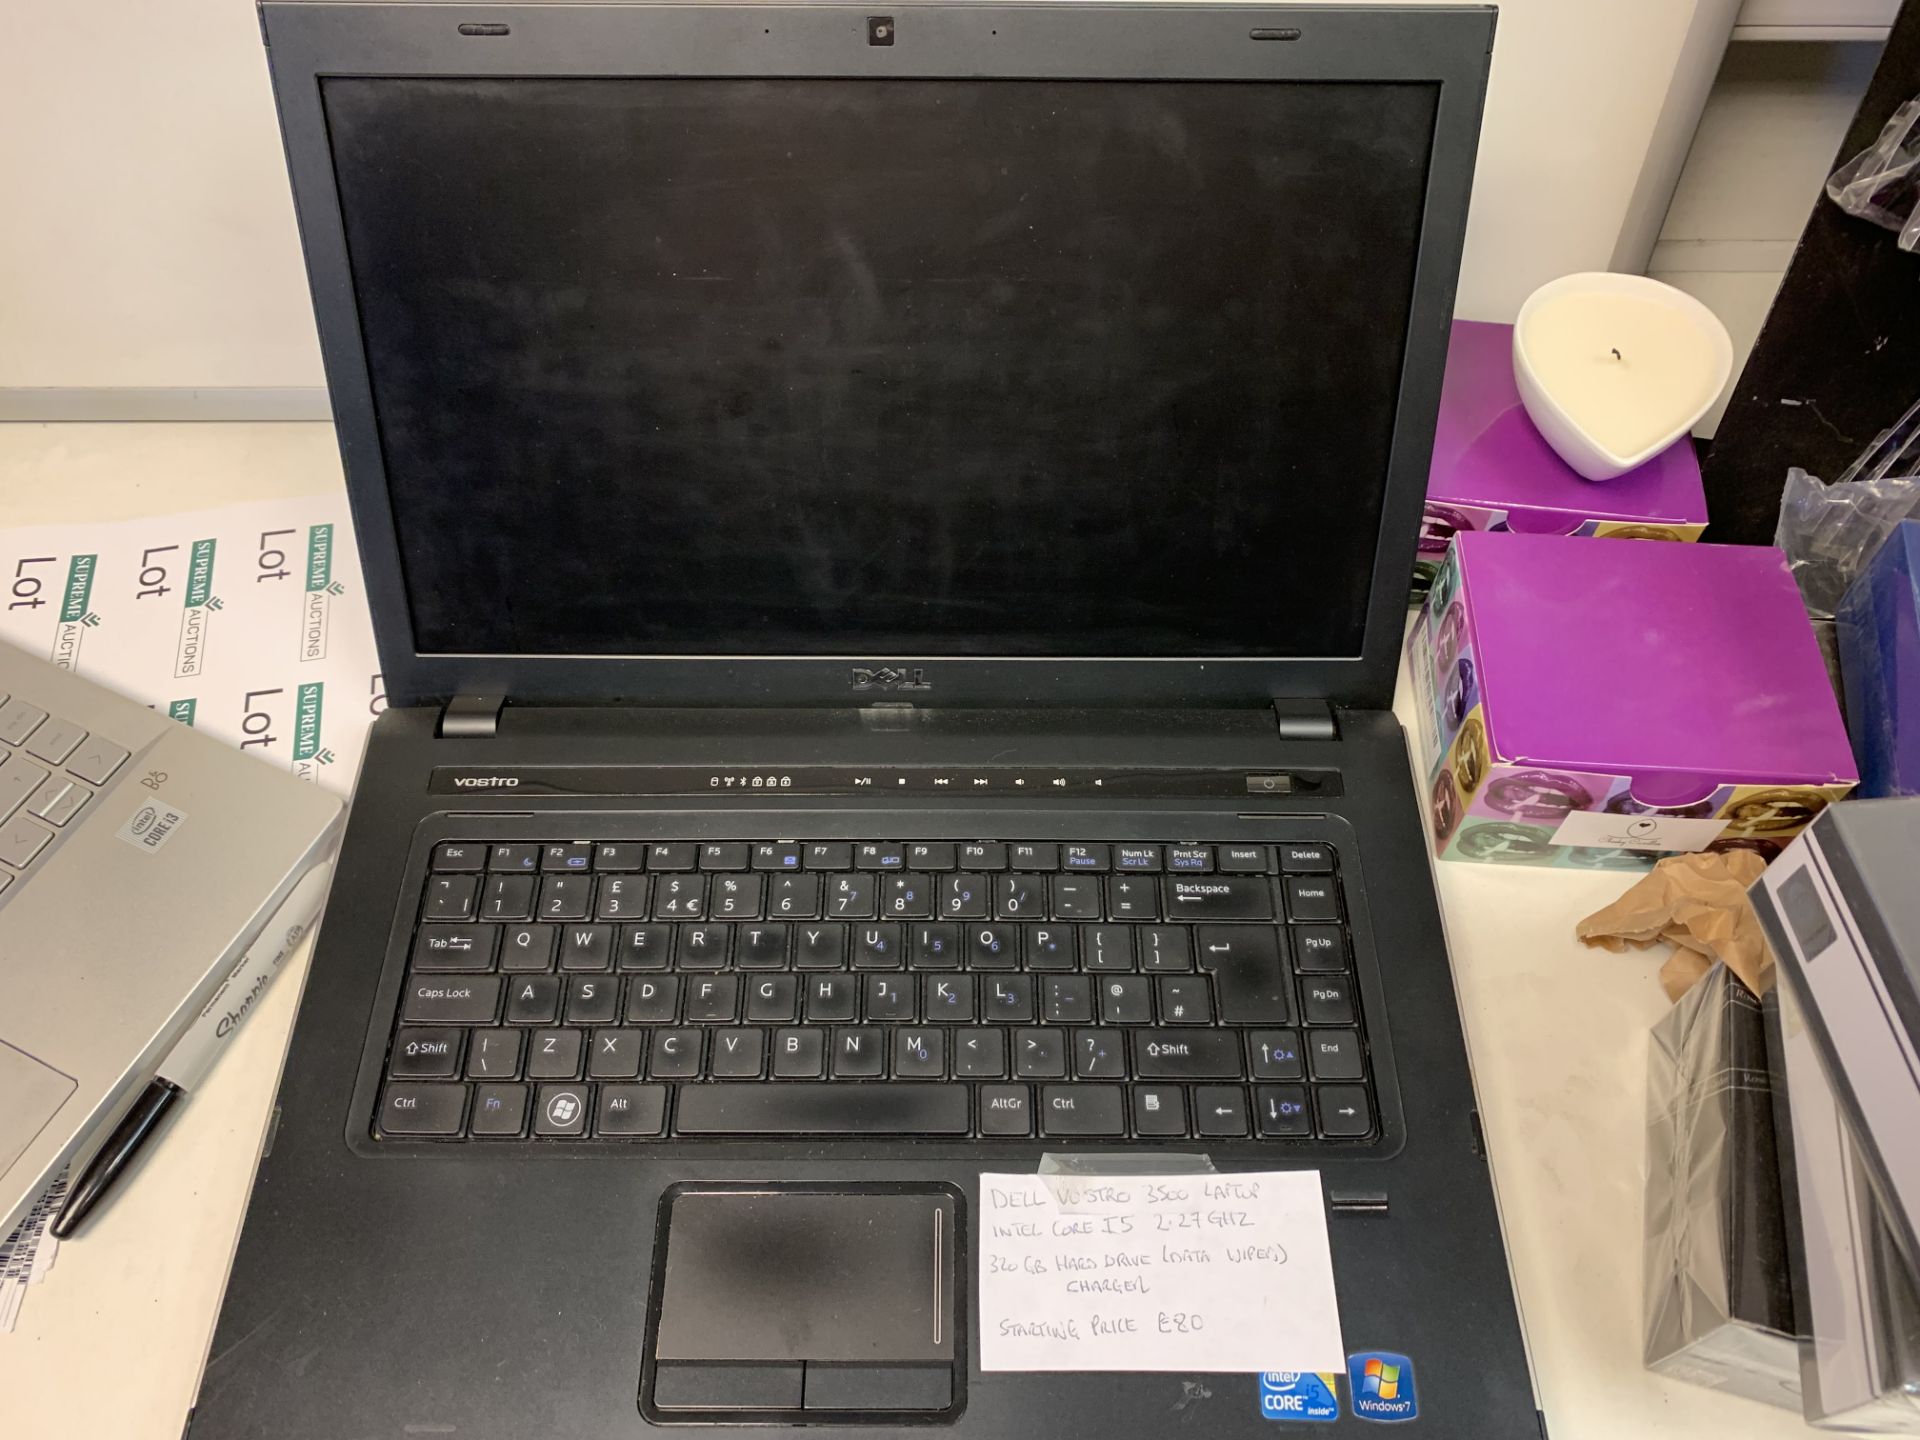 DELL VOSTRO 3500 LAPTOP, INTEL CORE i5 2.27 GHZ, 320 GB HARD DRIVE ( DATA WIPED ) WITH CHARGER